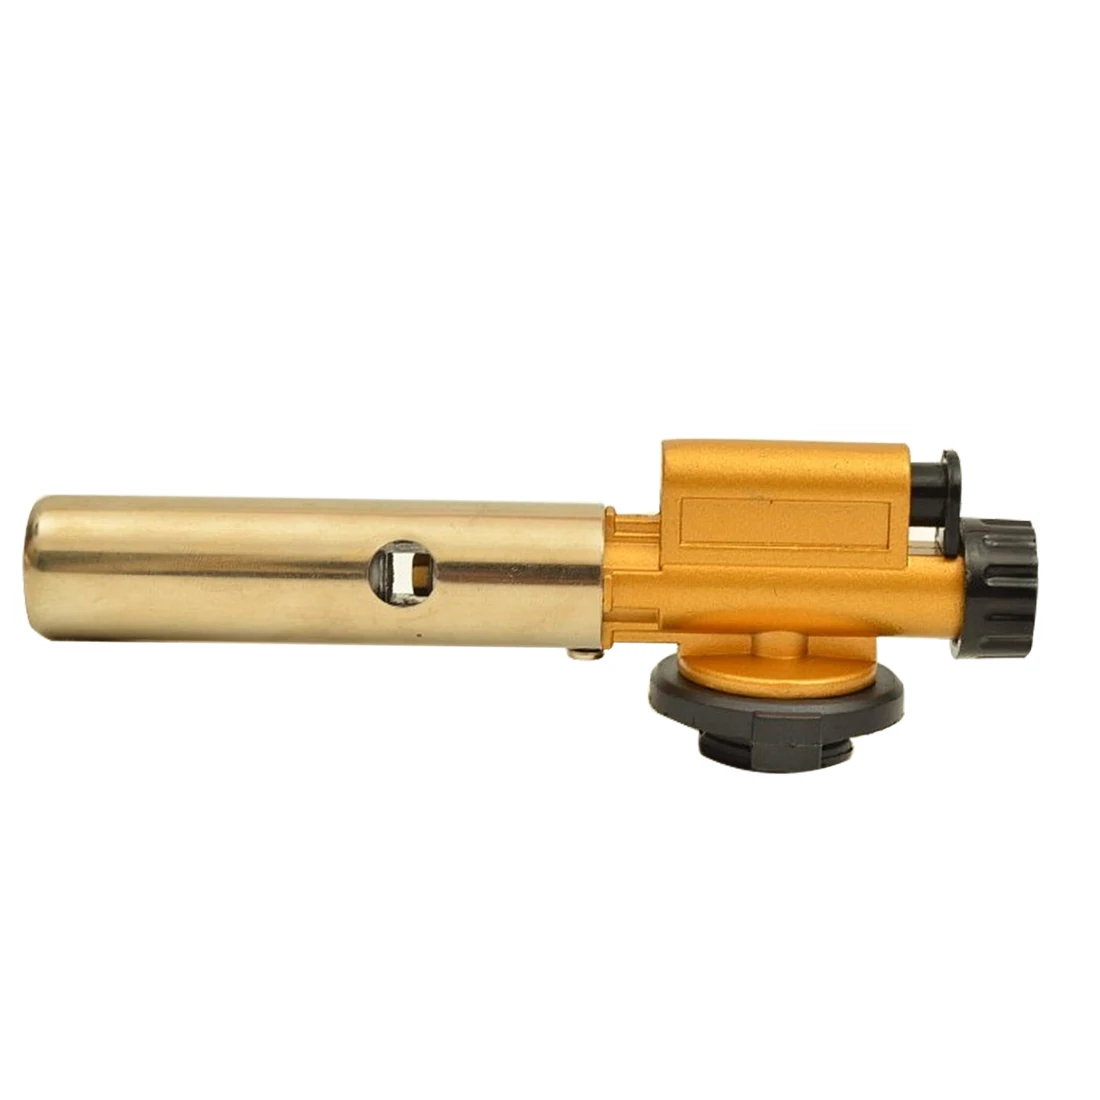 Copper Flame Gas Burners Gun Maker Torch Lighter for Outdoor Camping Picnic ❤ 